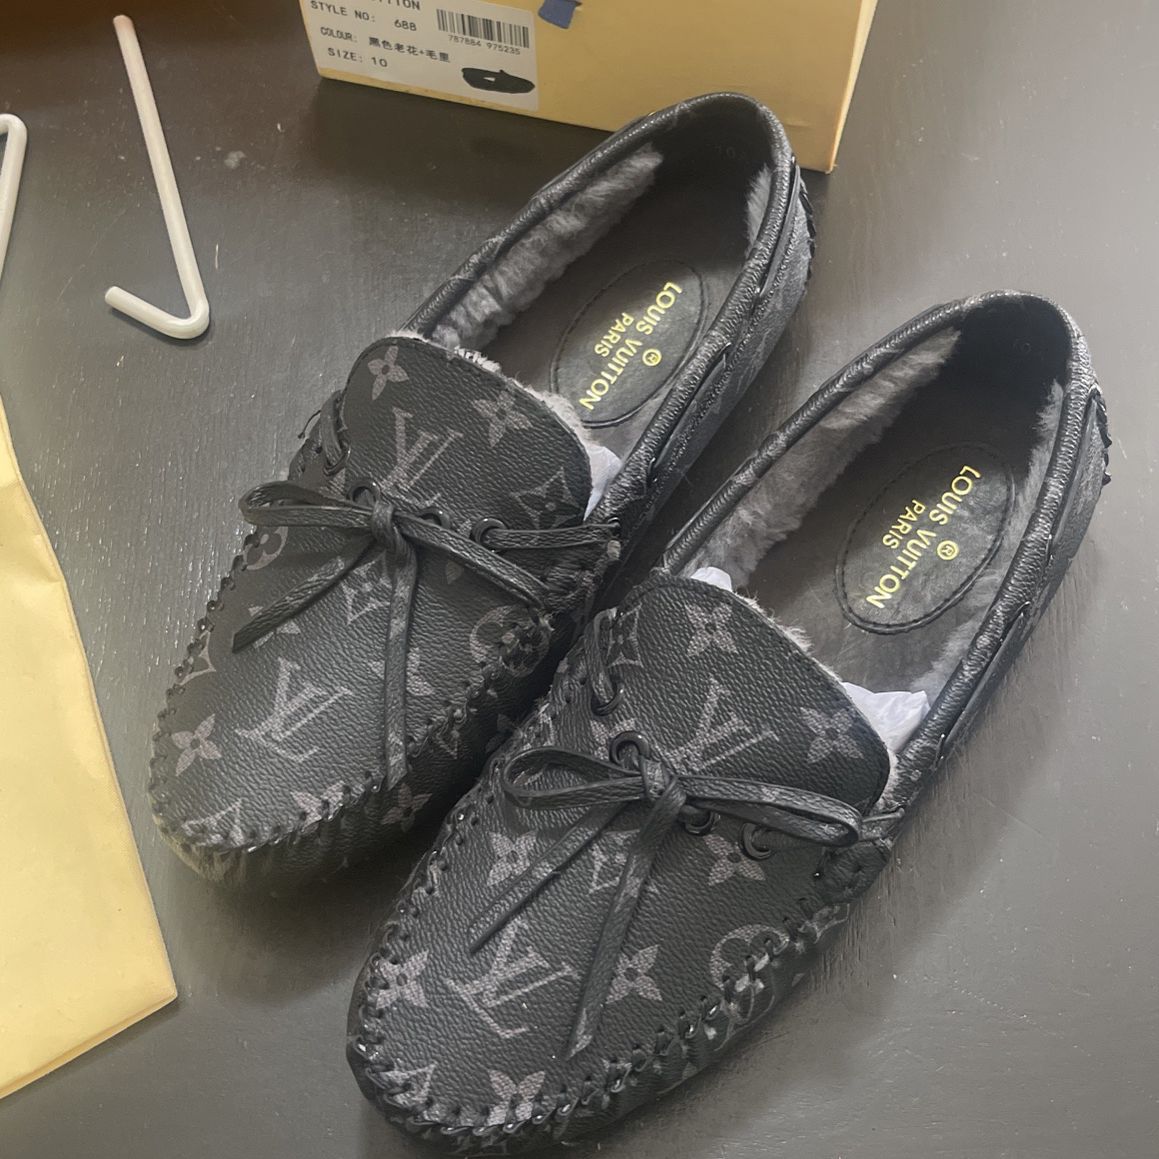 LOUIS VUITTON Arizona Moccasin Monogram Canvas Men's Shoes Loafers for Sale  in Glen Cove, NY - OfferUp